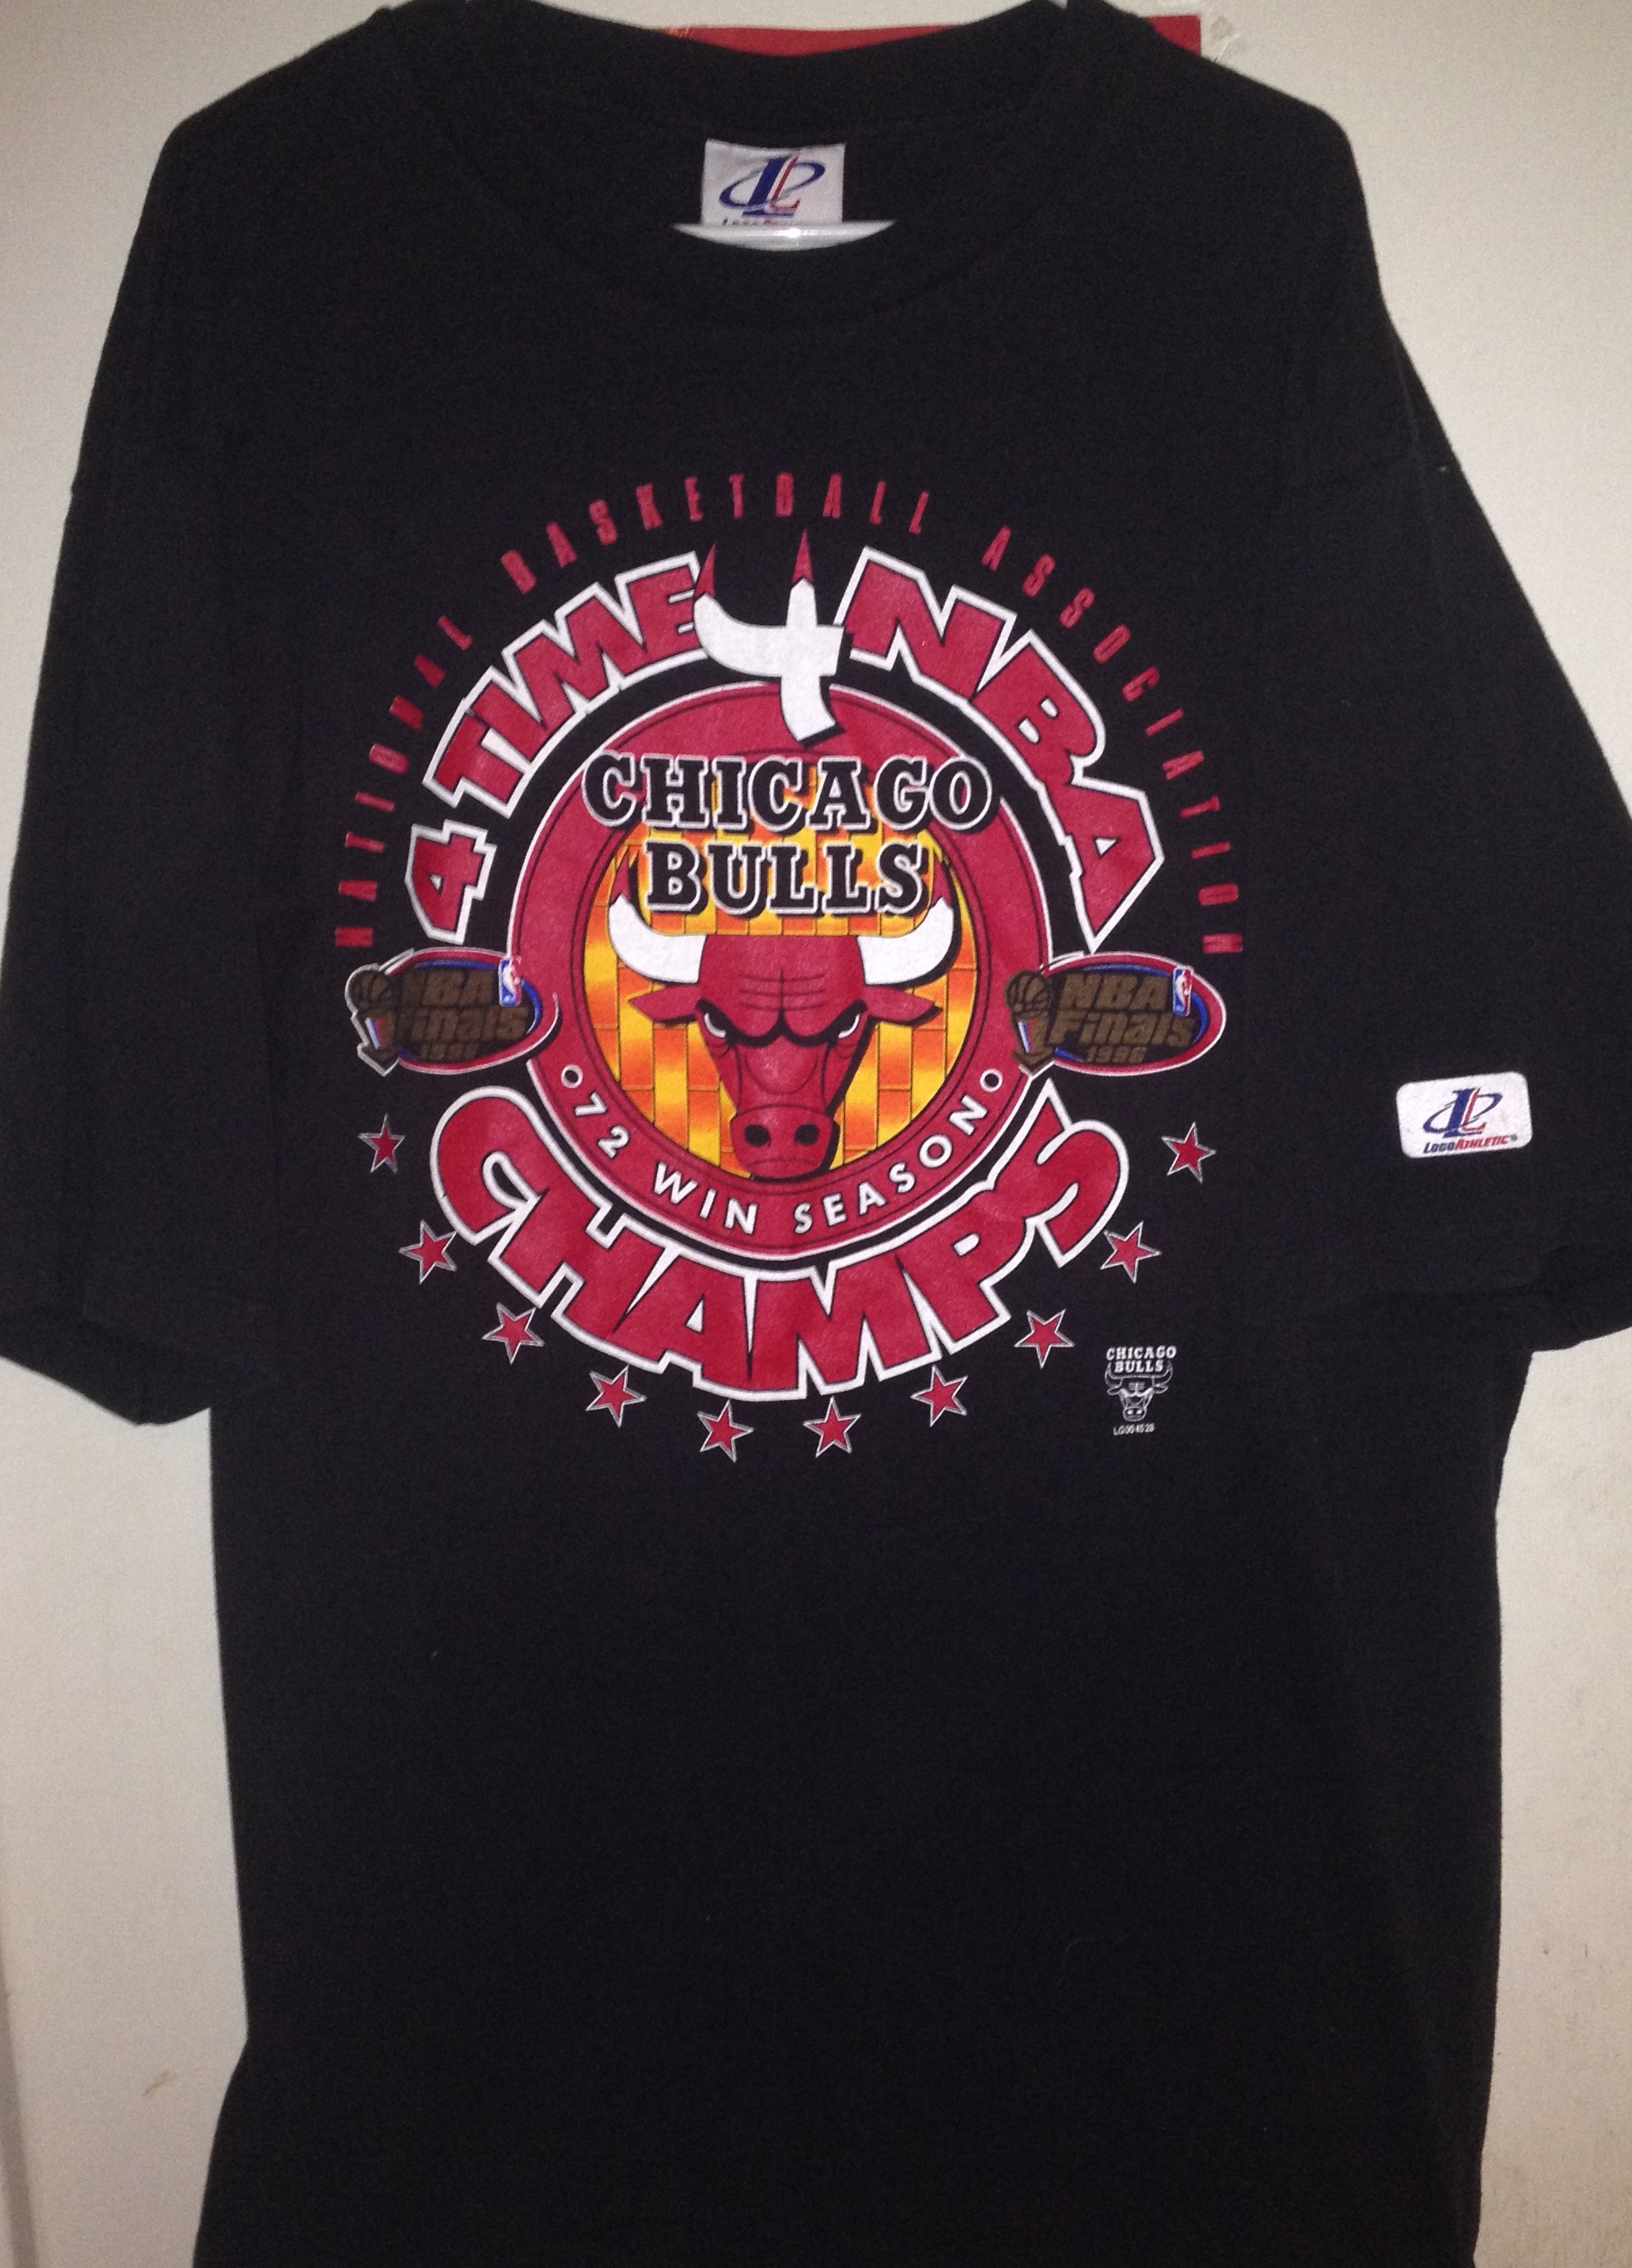 VINTAGE CHICAGO BULLS 6 TIME NBA CHAMPIONS T-SHIRT BY